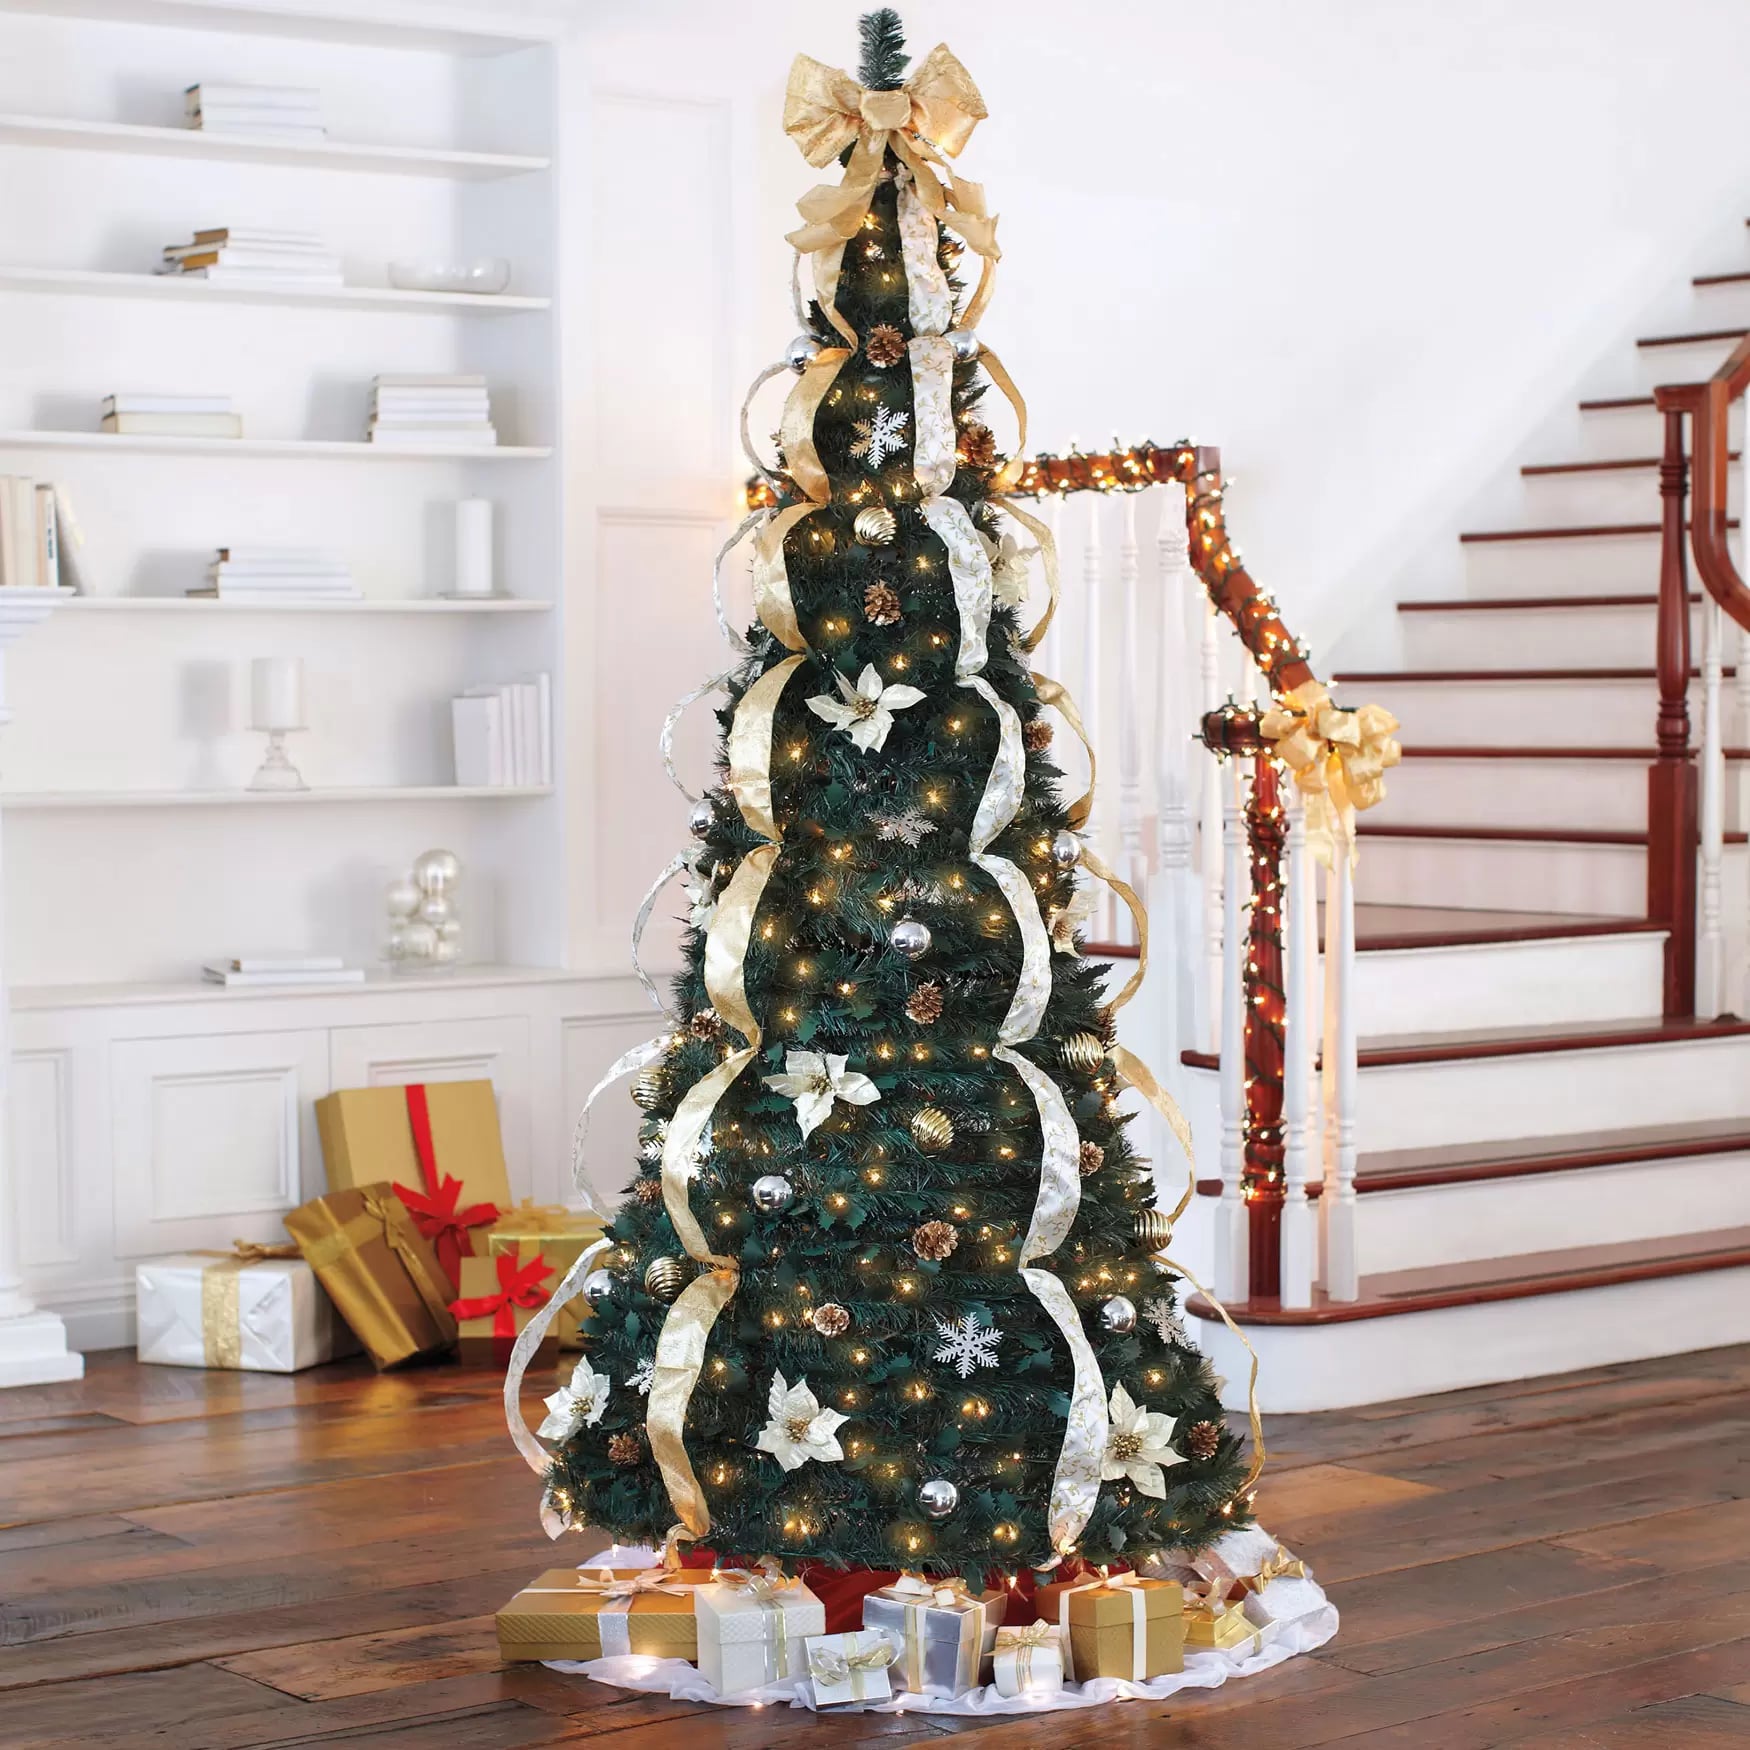 N&T NIETING Christmas Tree5ft Collapsible Pop Up Christmas Tree Fuchsia Tinse... 